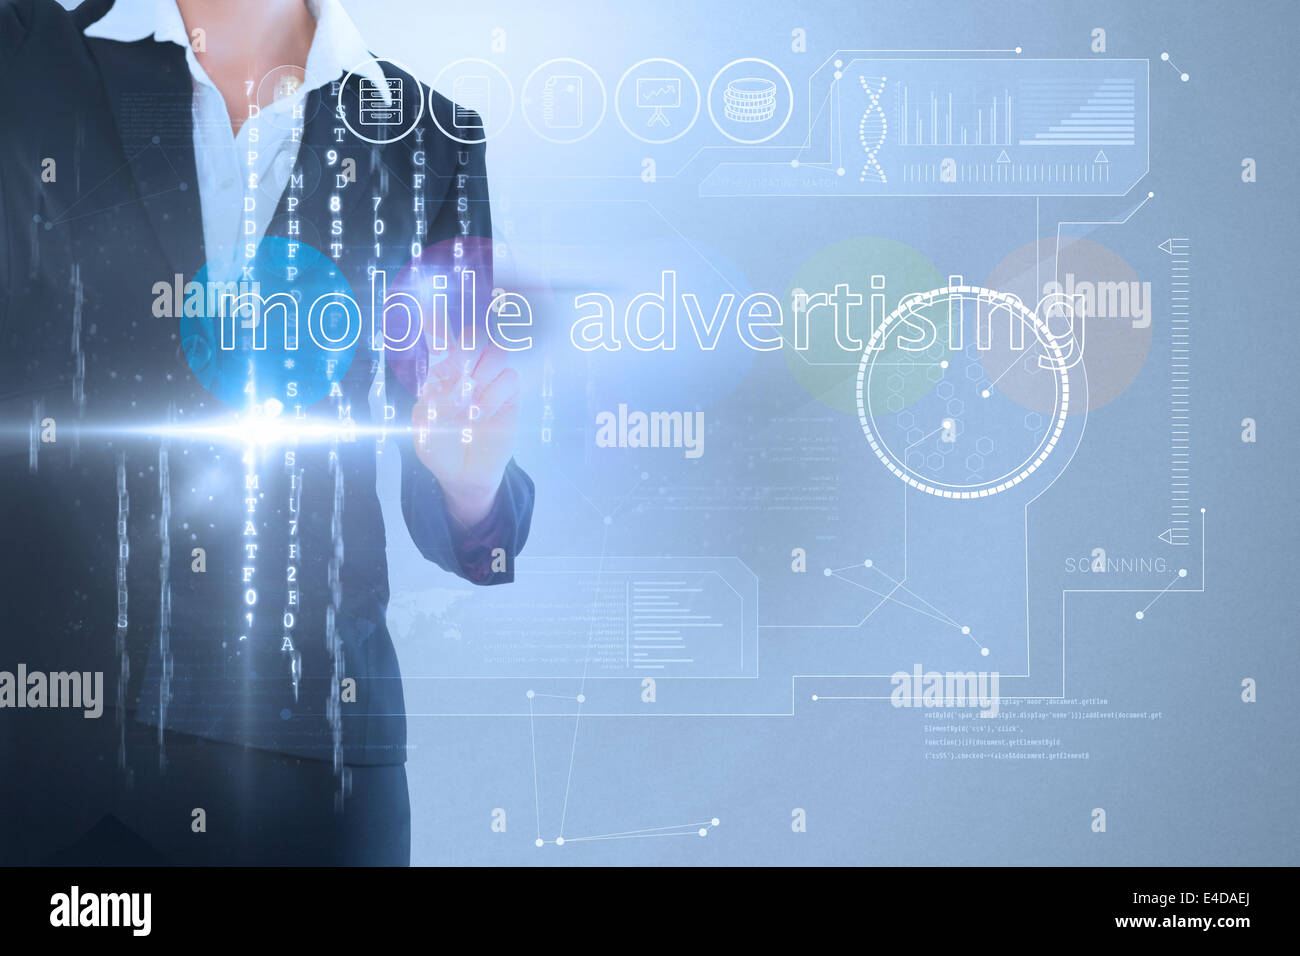 Businesswoman touching the words mobile advertising on interface Stock Photo